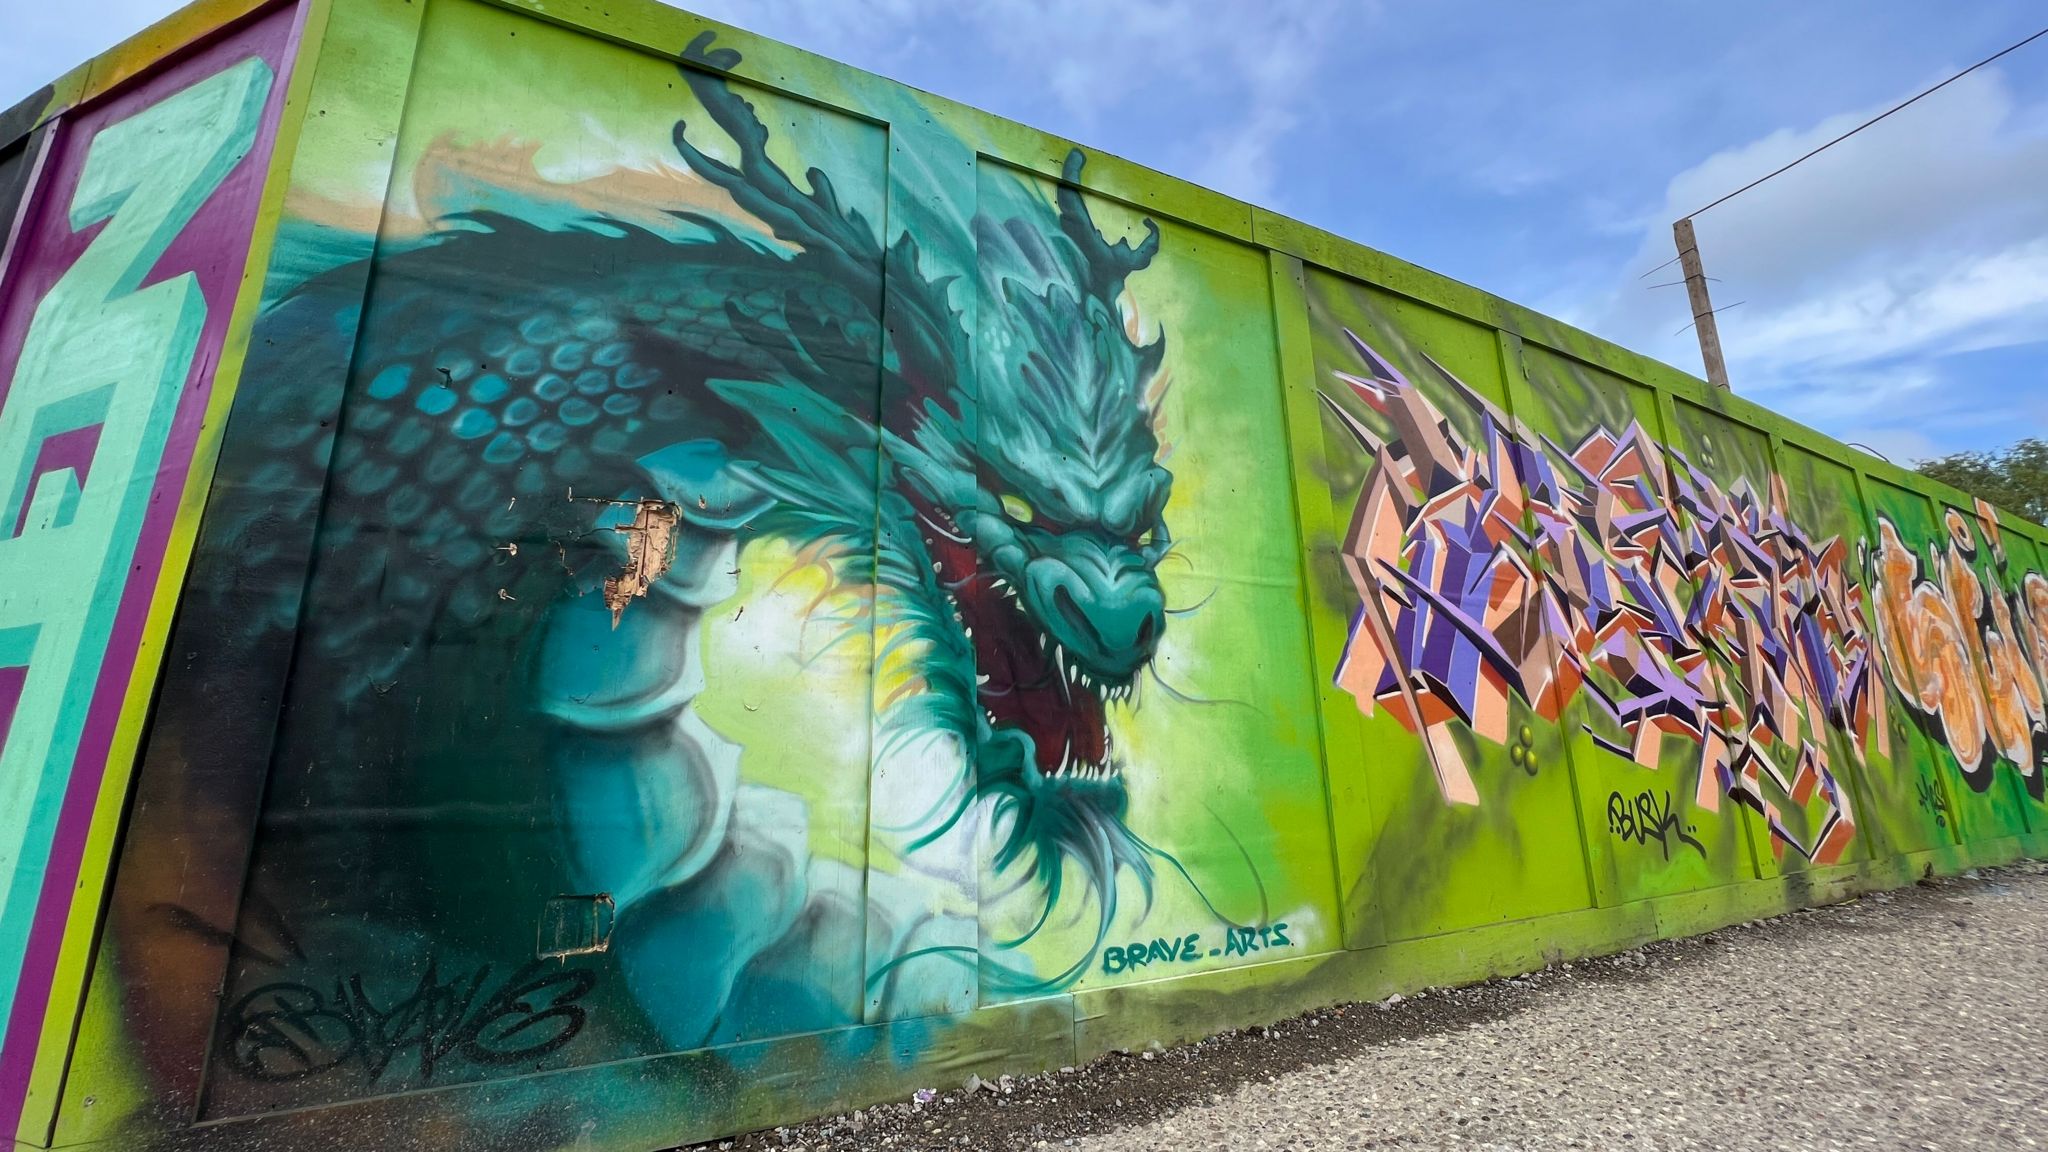 A dragon mural on a wooden boarding on Baddow Road, Chelmsford.